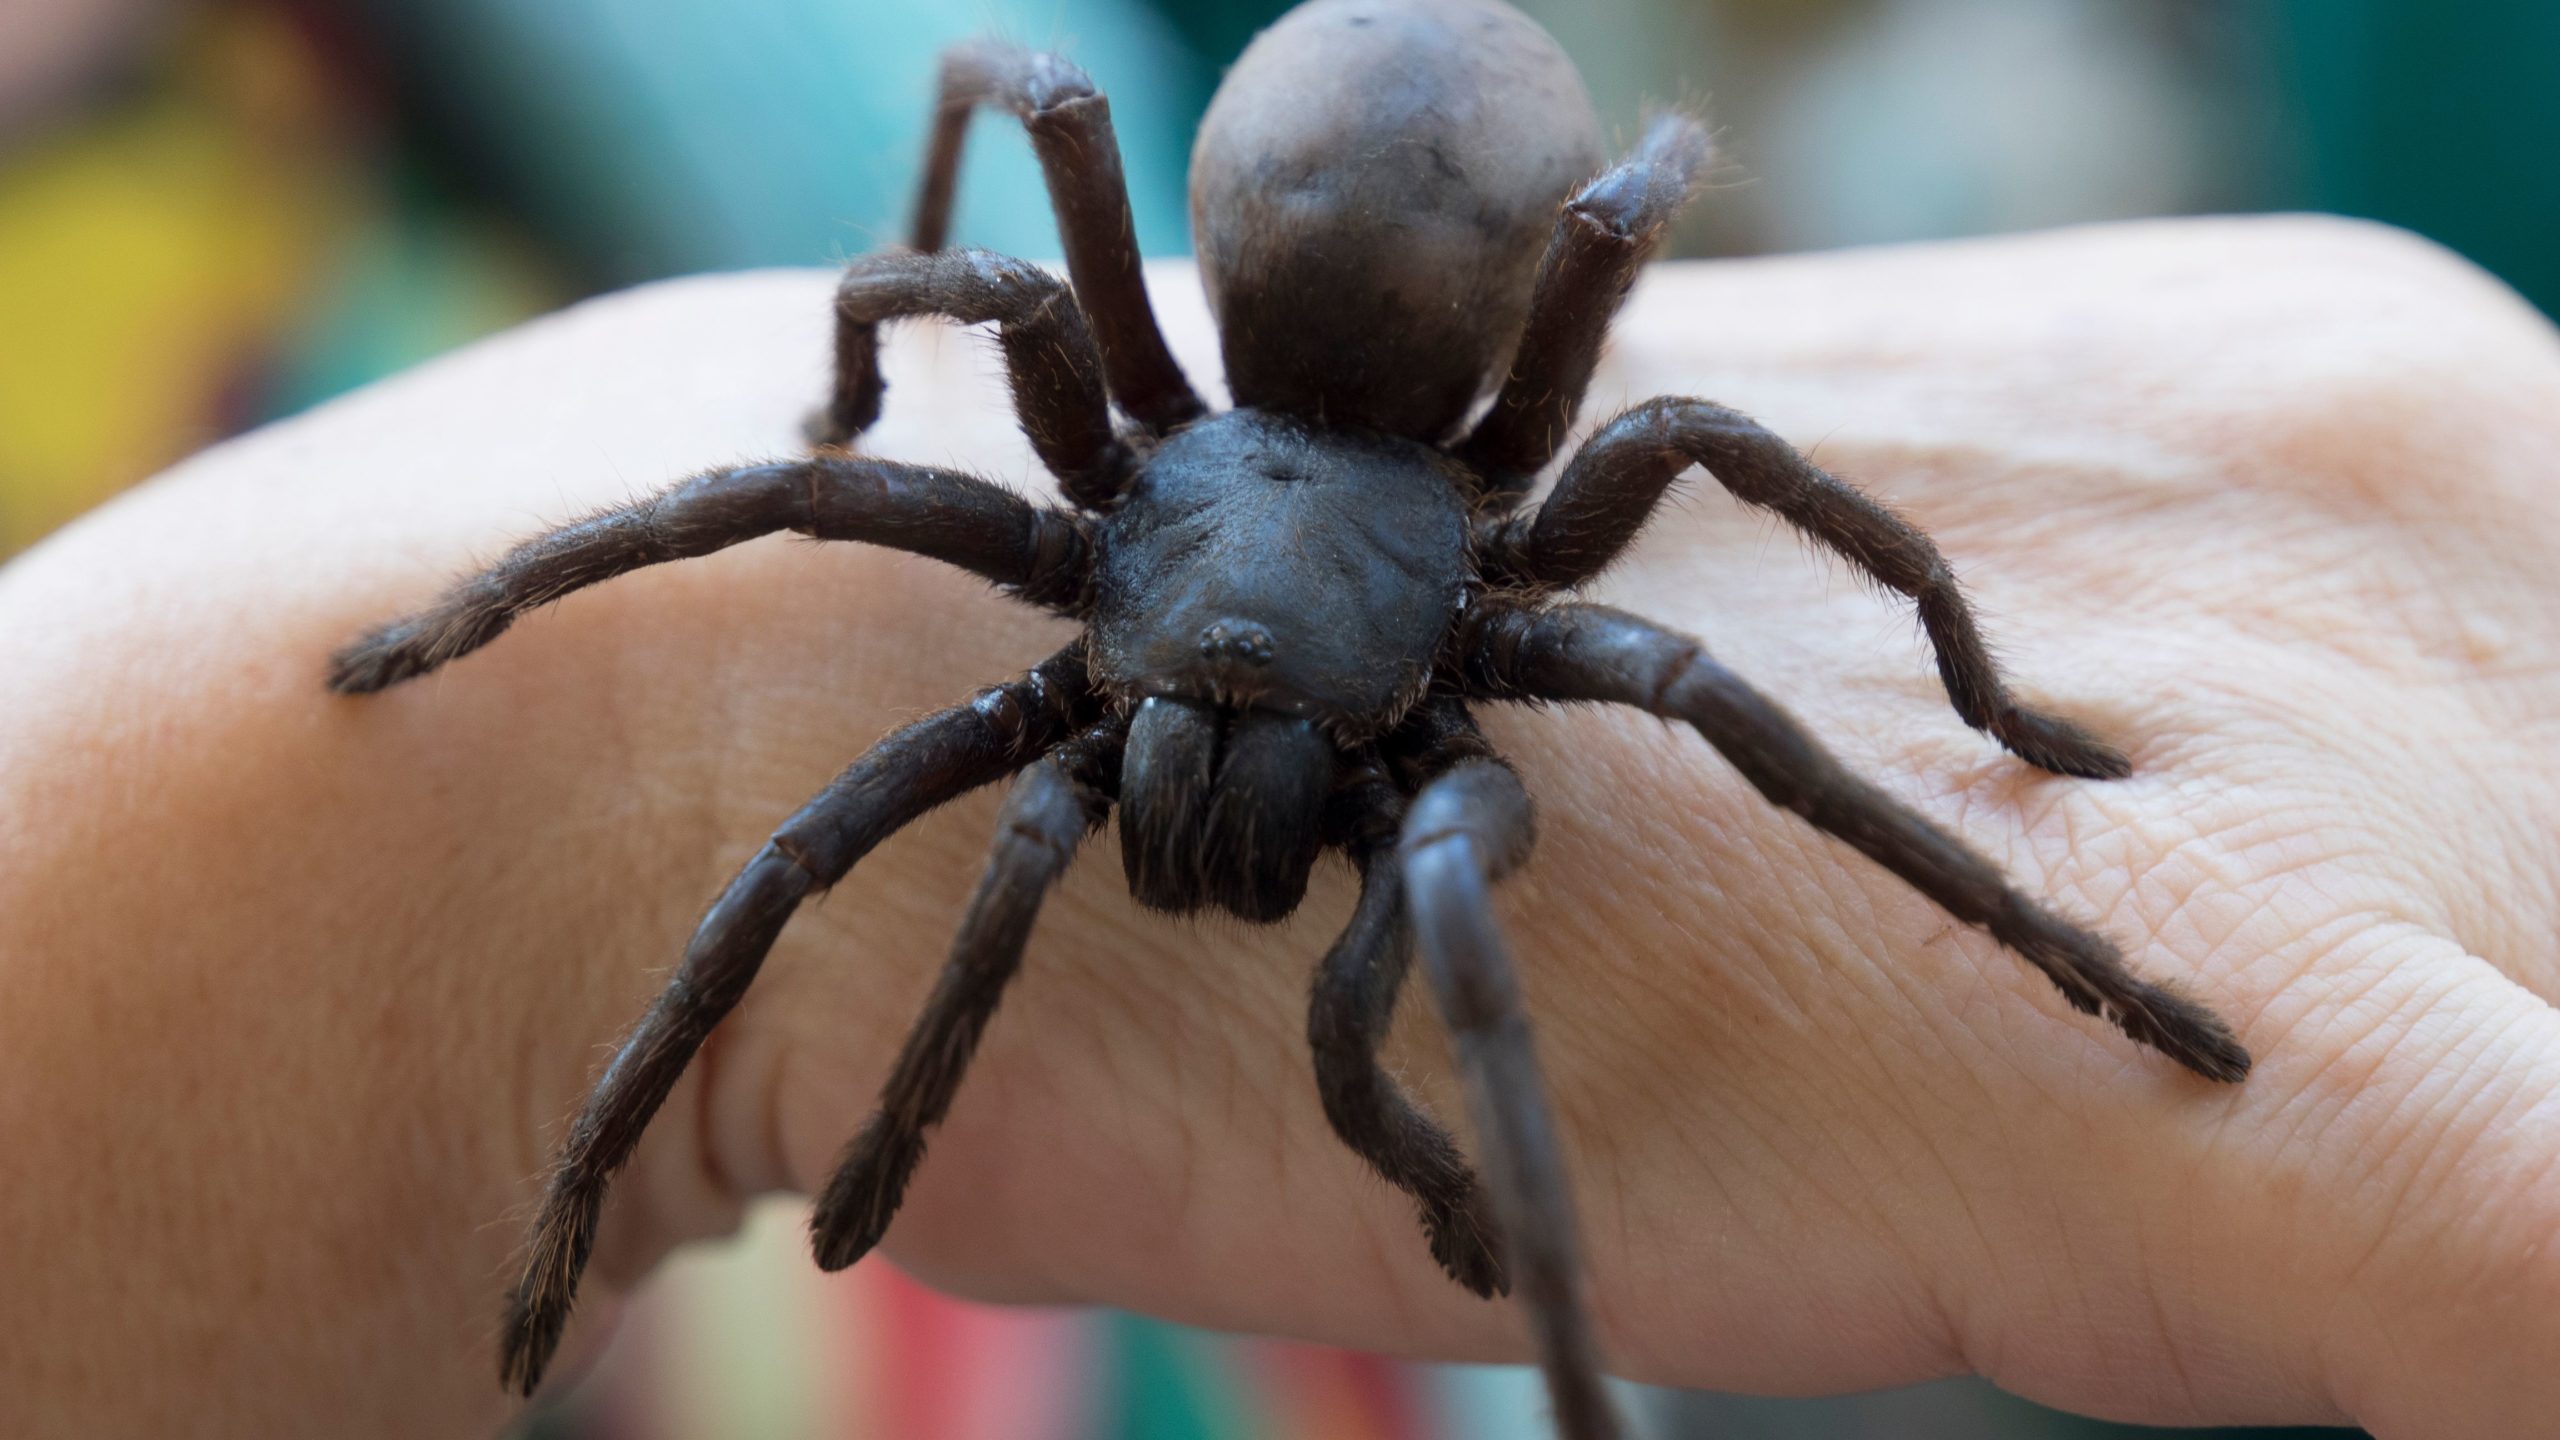 Police arrived When A Woman heard Screaming and Crying about a Huge Spider!